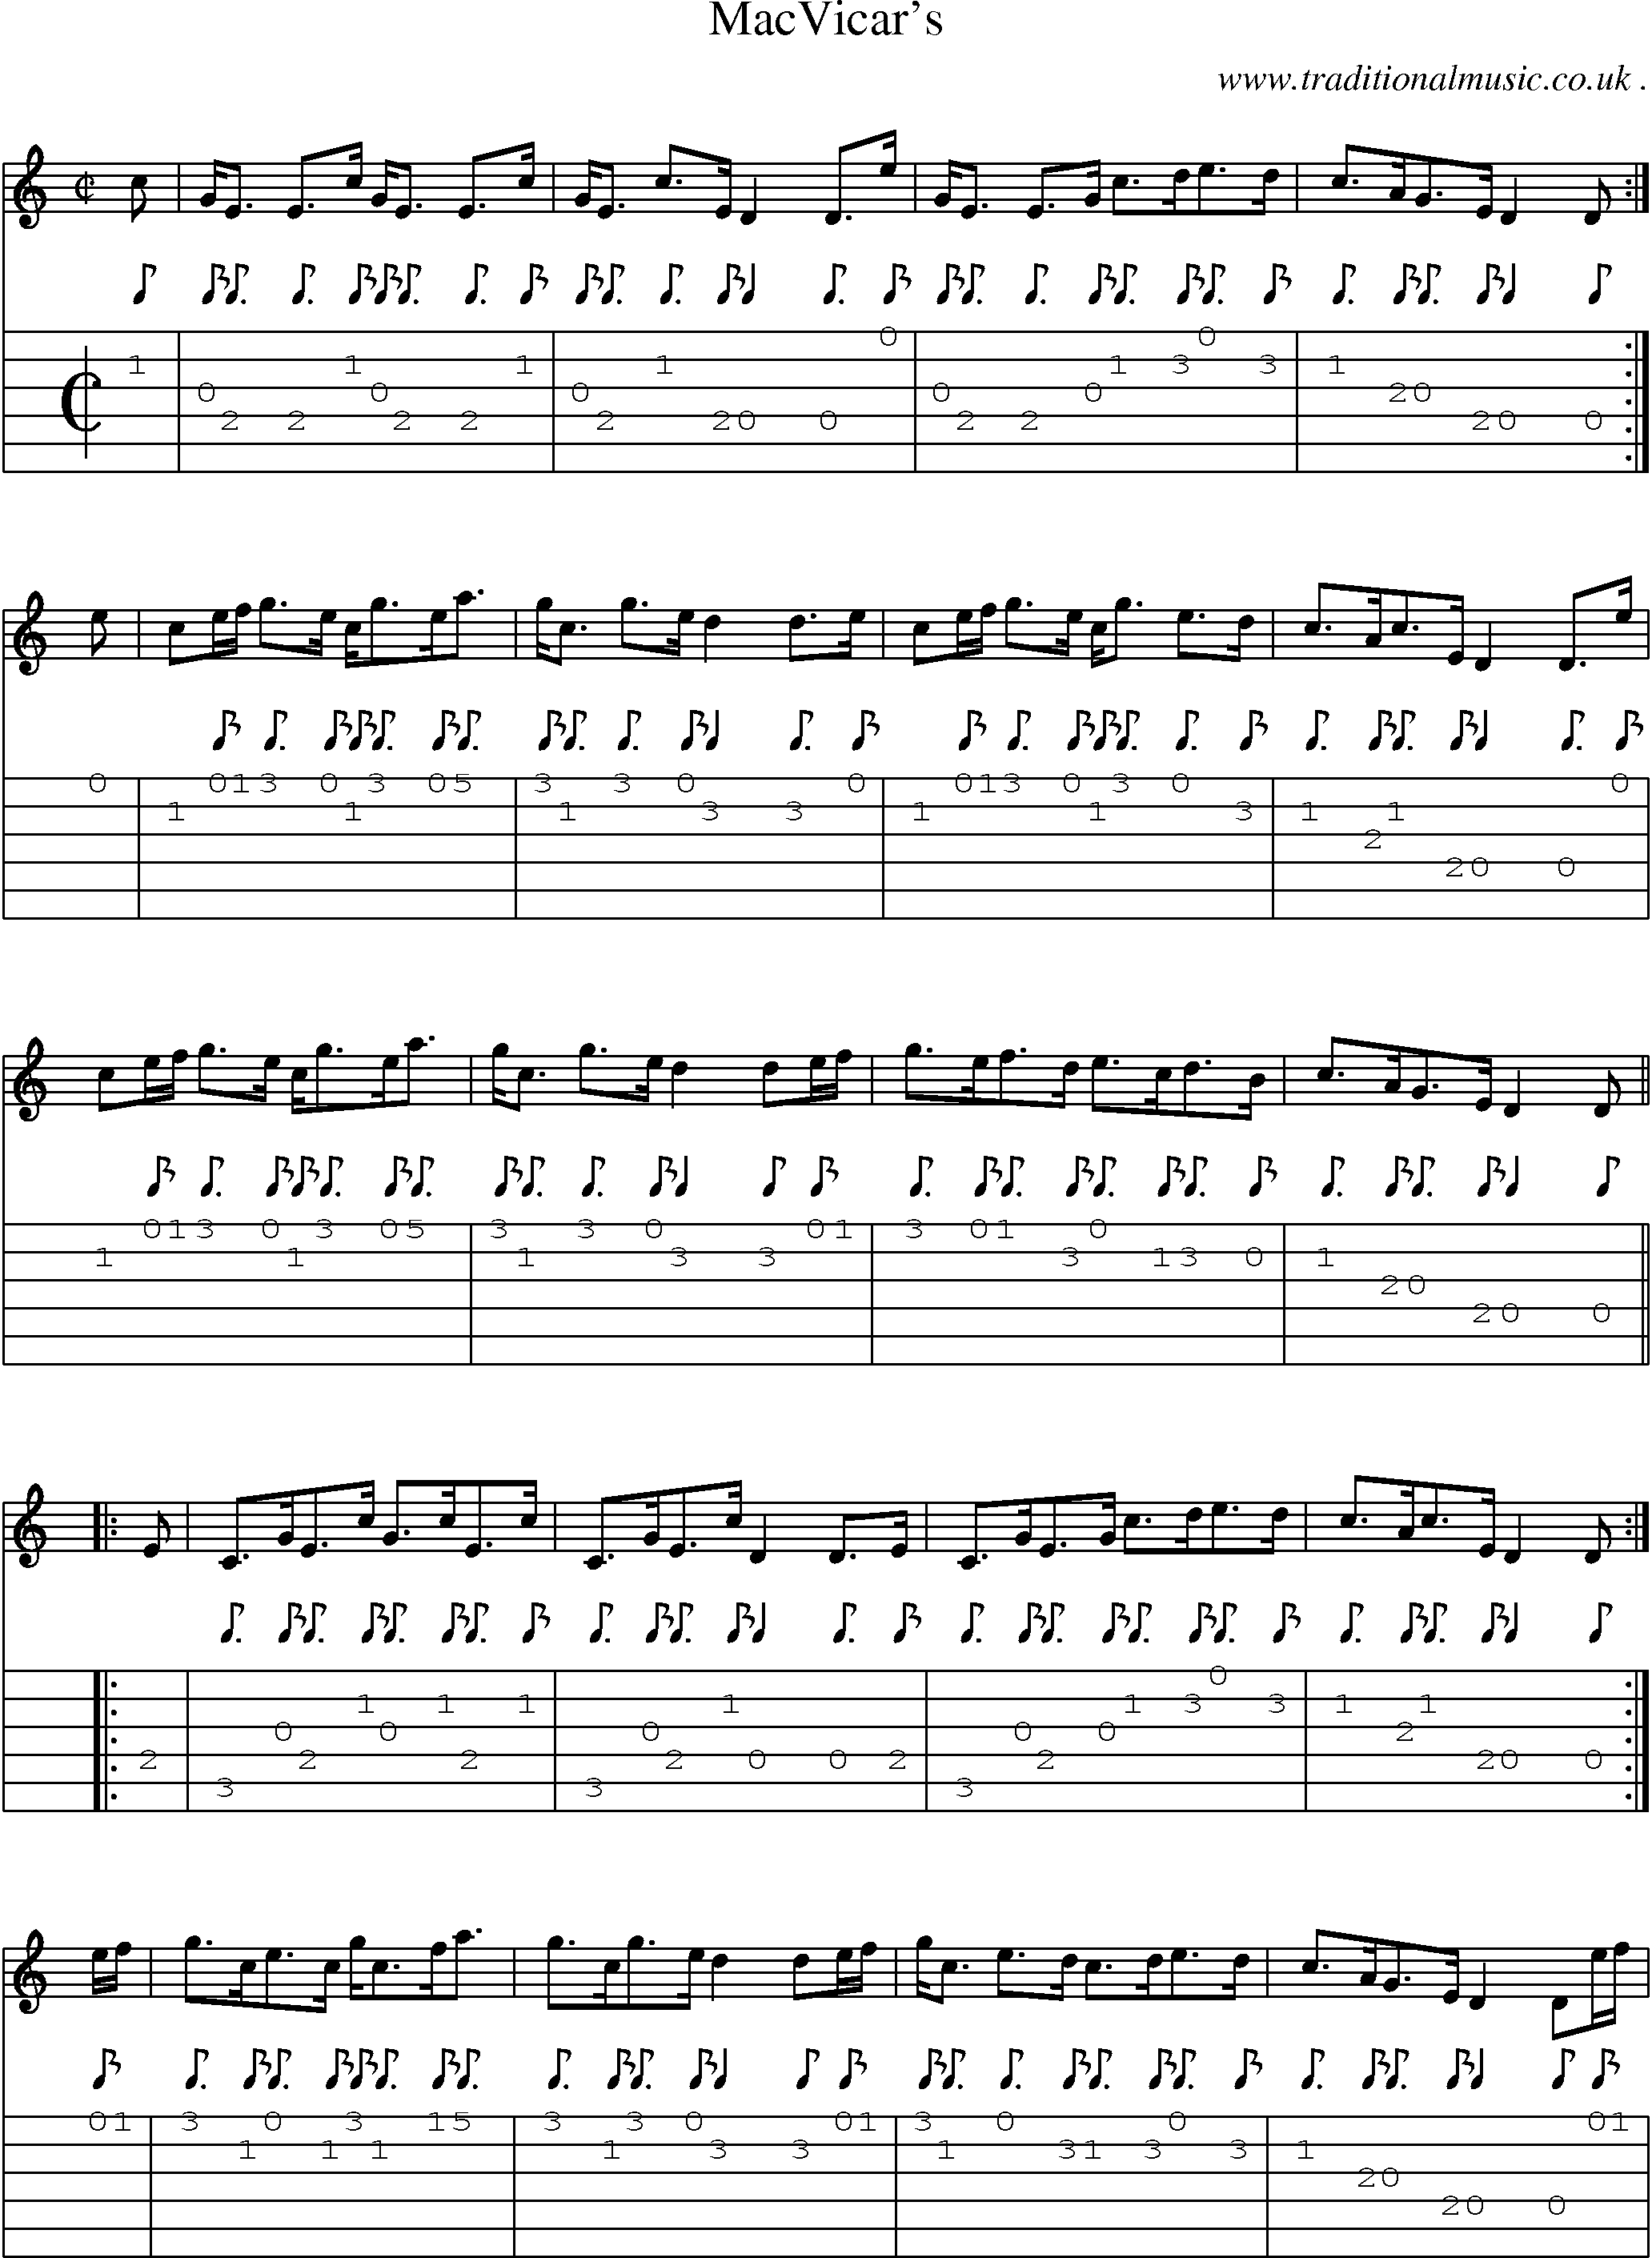 Sheet-music  score, Chords and Guitar Tabs for Macvicars